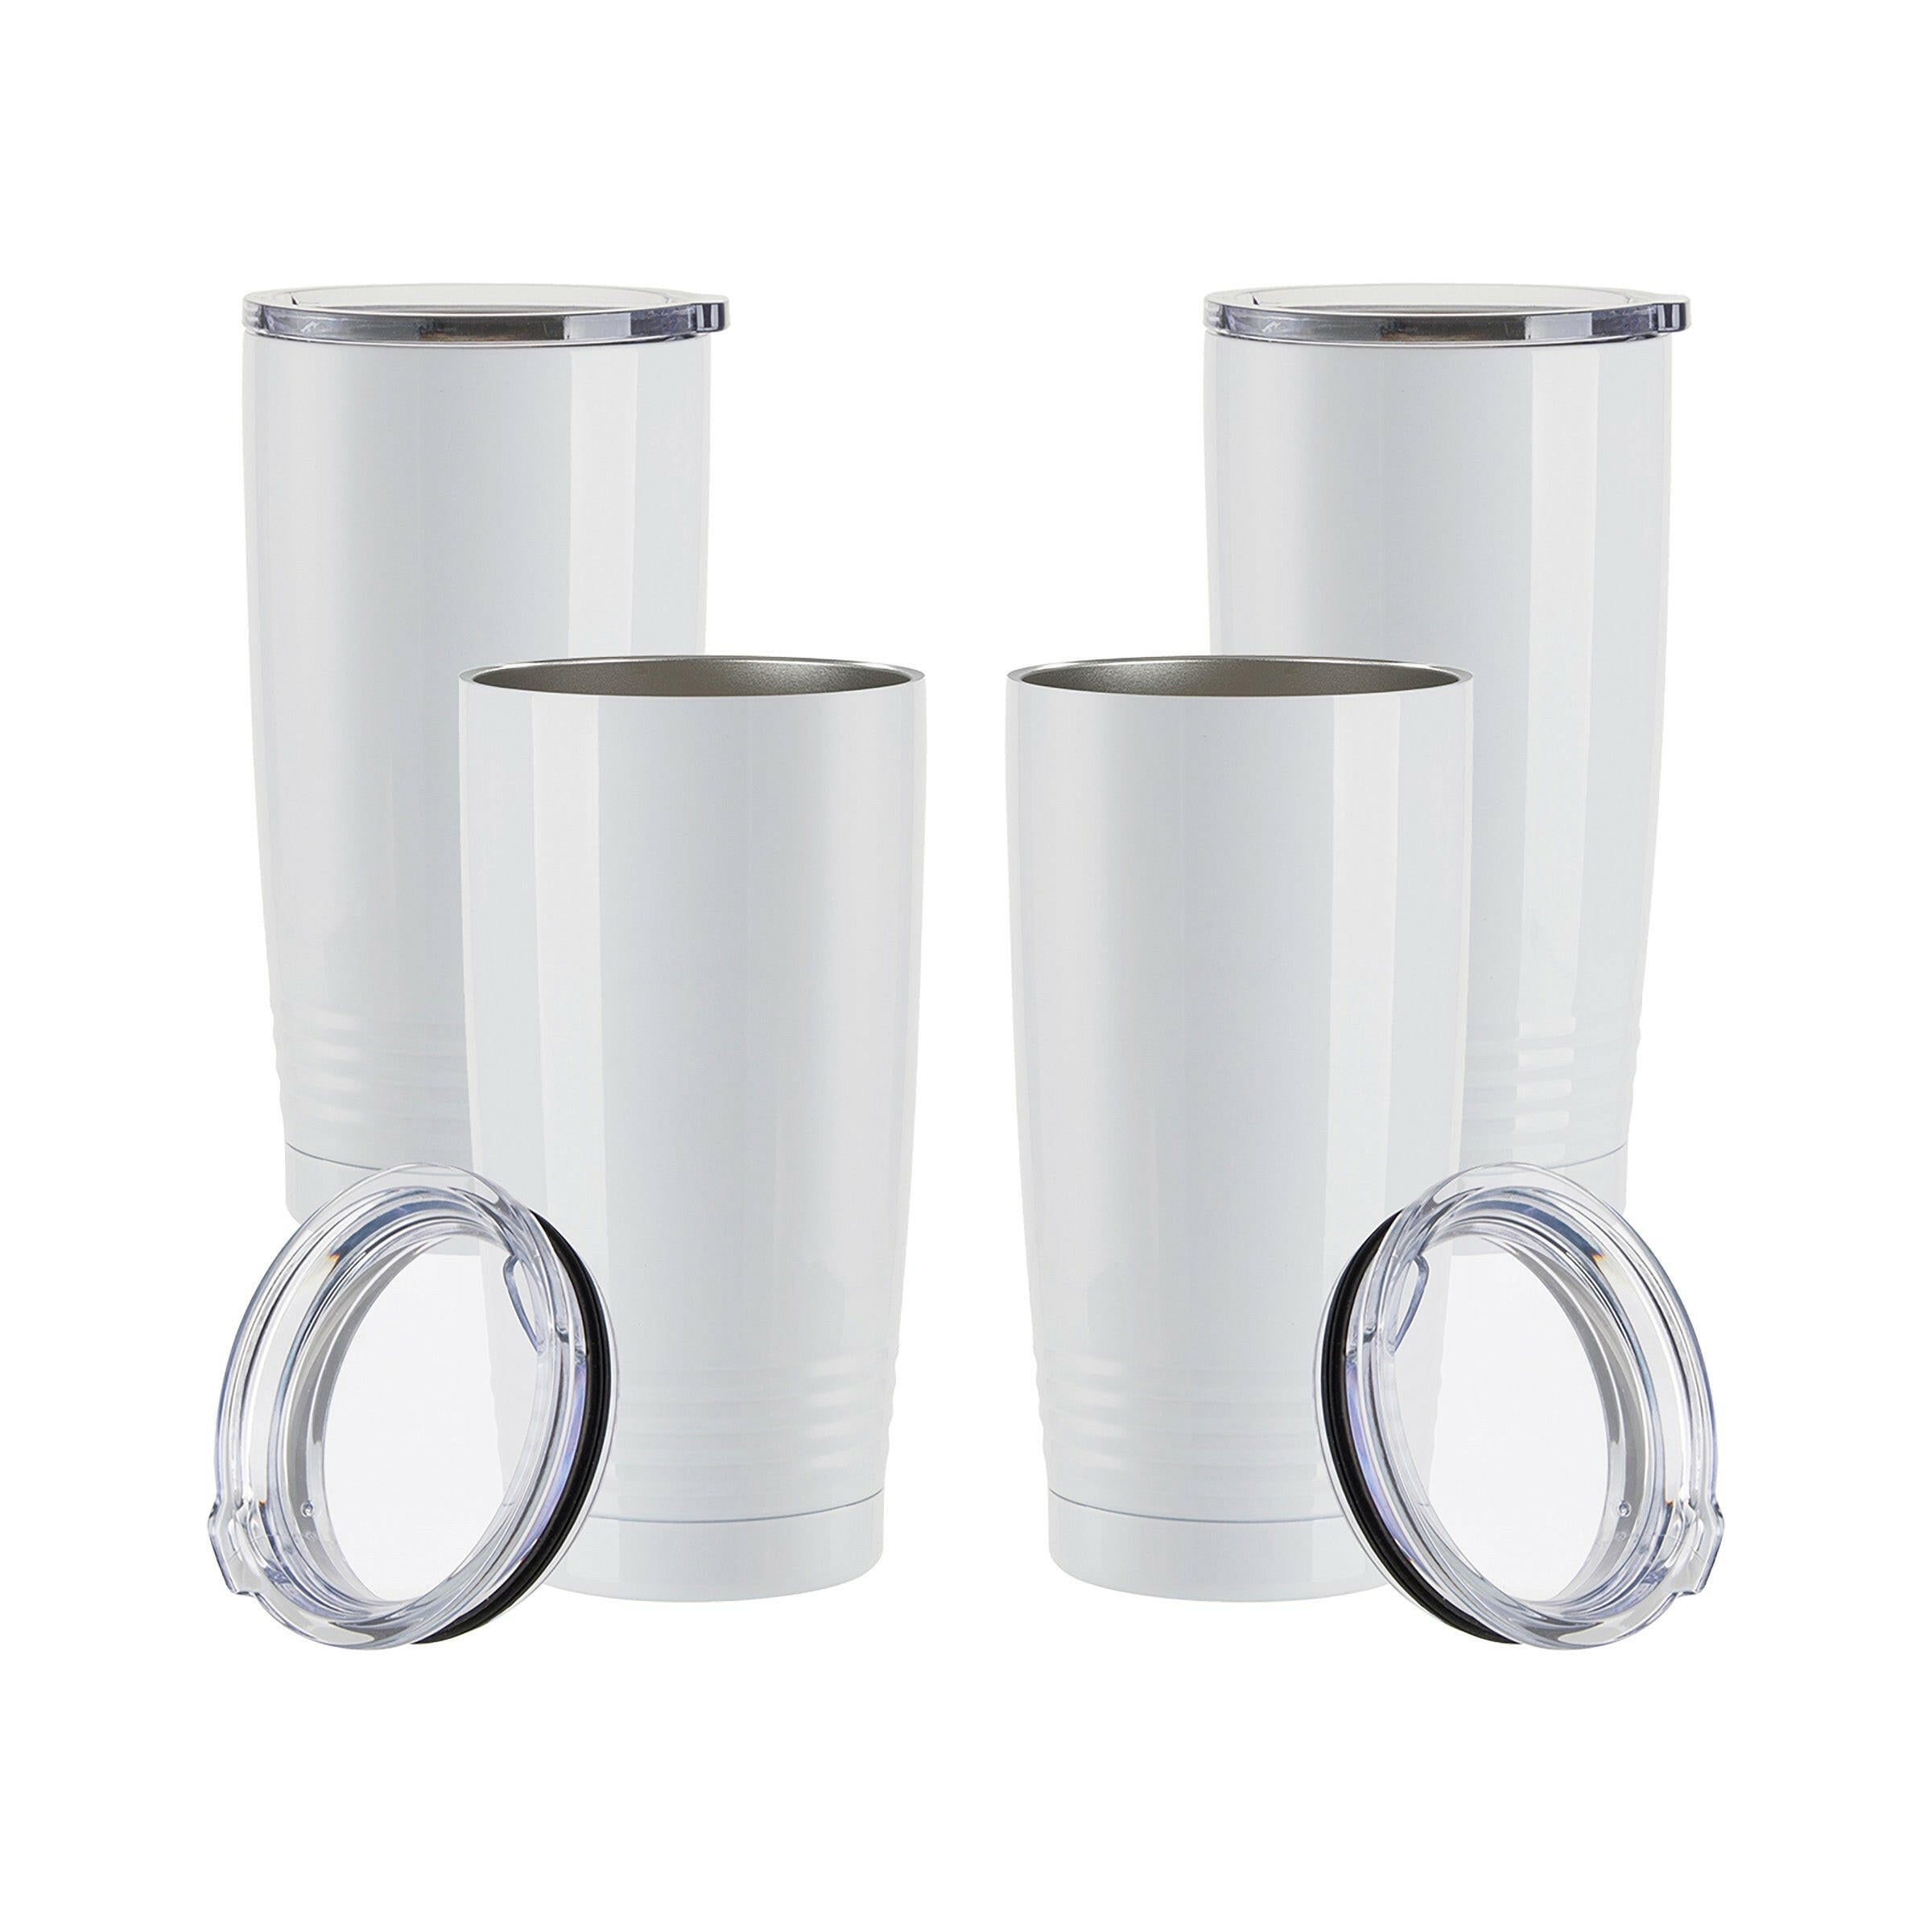 20oz Stainless Steel Sublimation Tapered Travel Tumbler - 4 Pack.